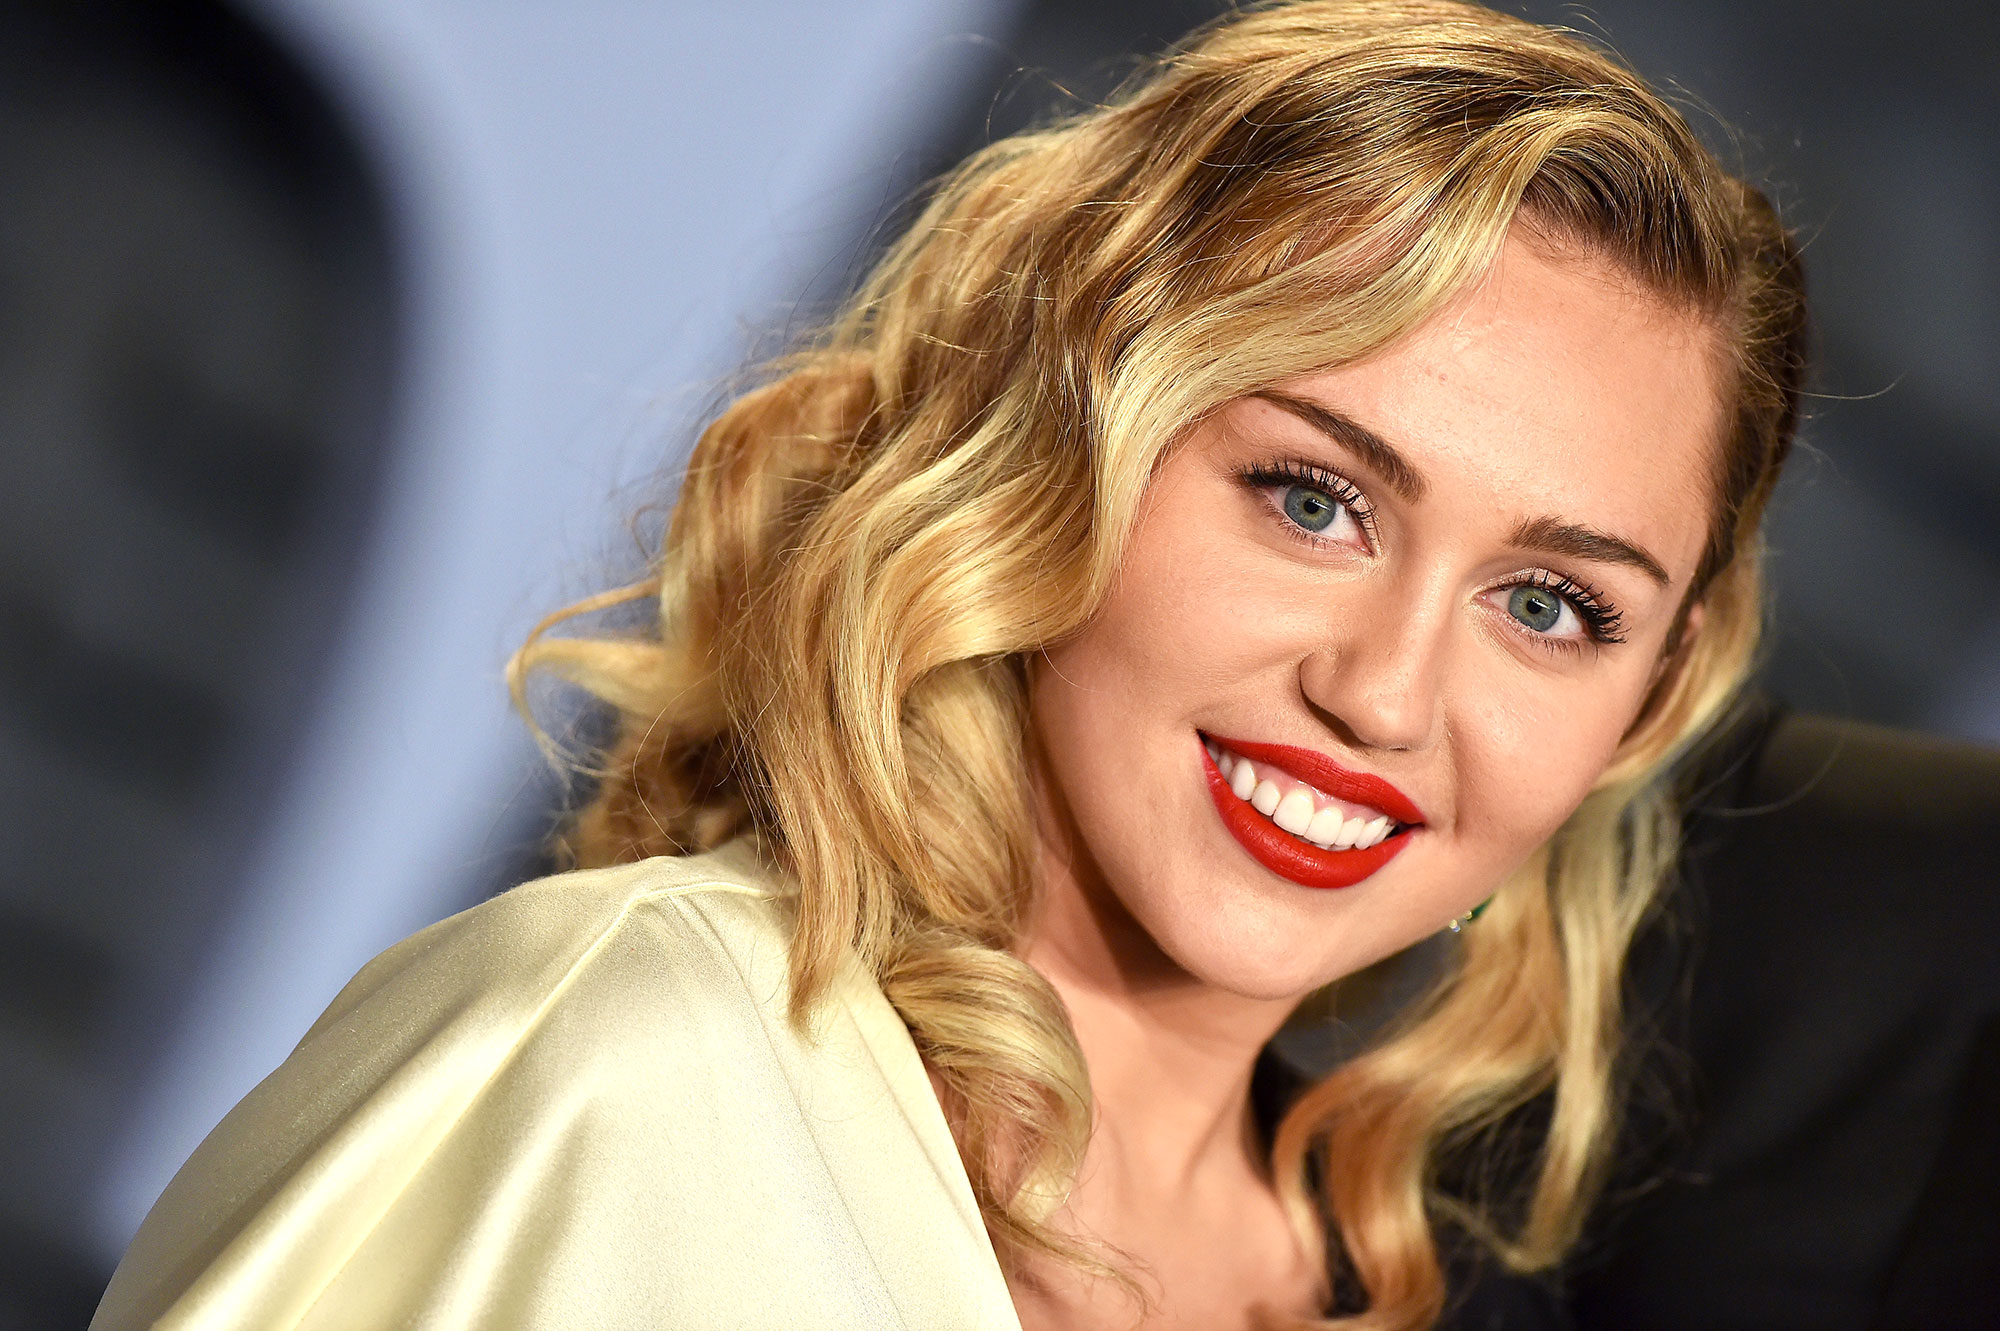 Miley Cyrus Creampie Porn - Miley Cyrus' Dating History: Timeline of Her Famous Exes, Flings